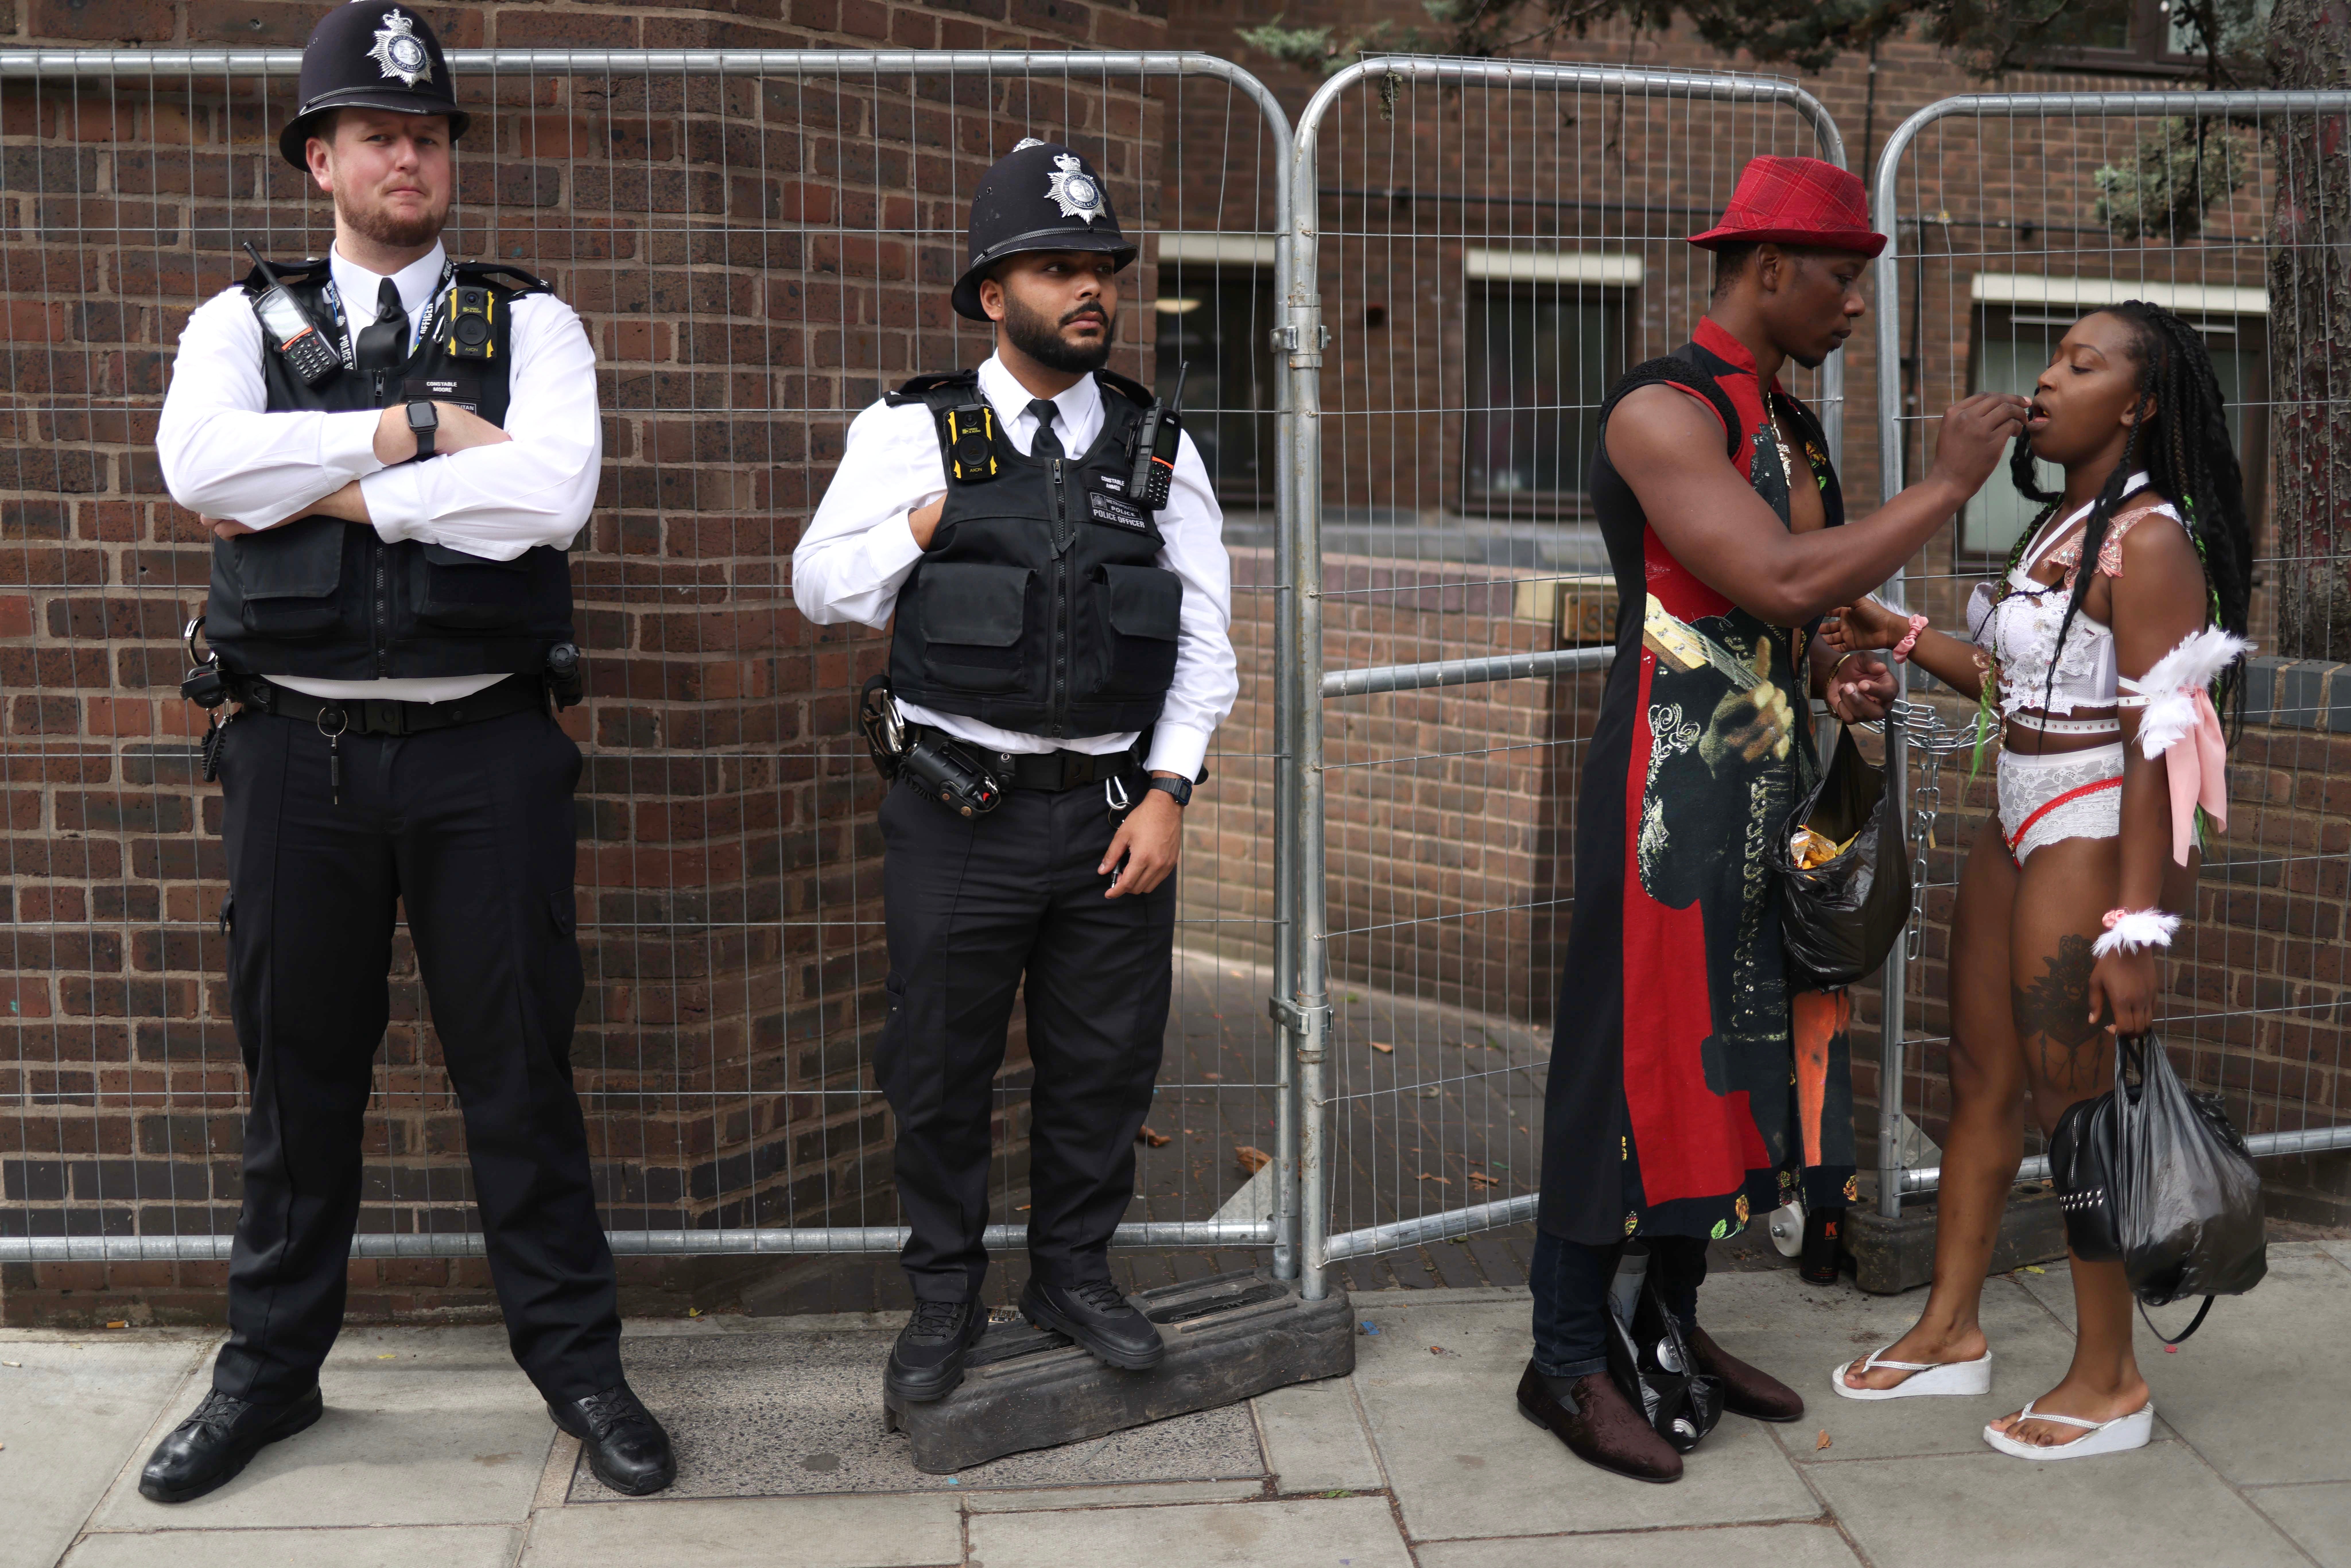 Carnival goers stand next to police officers